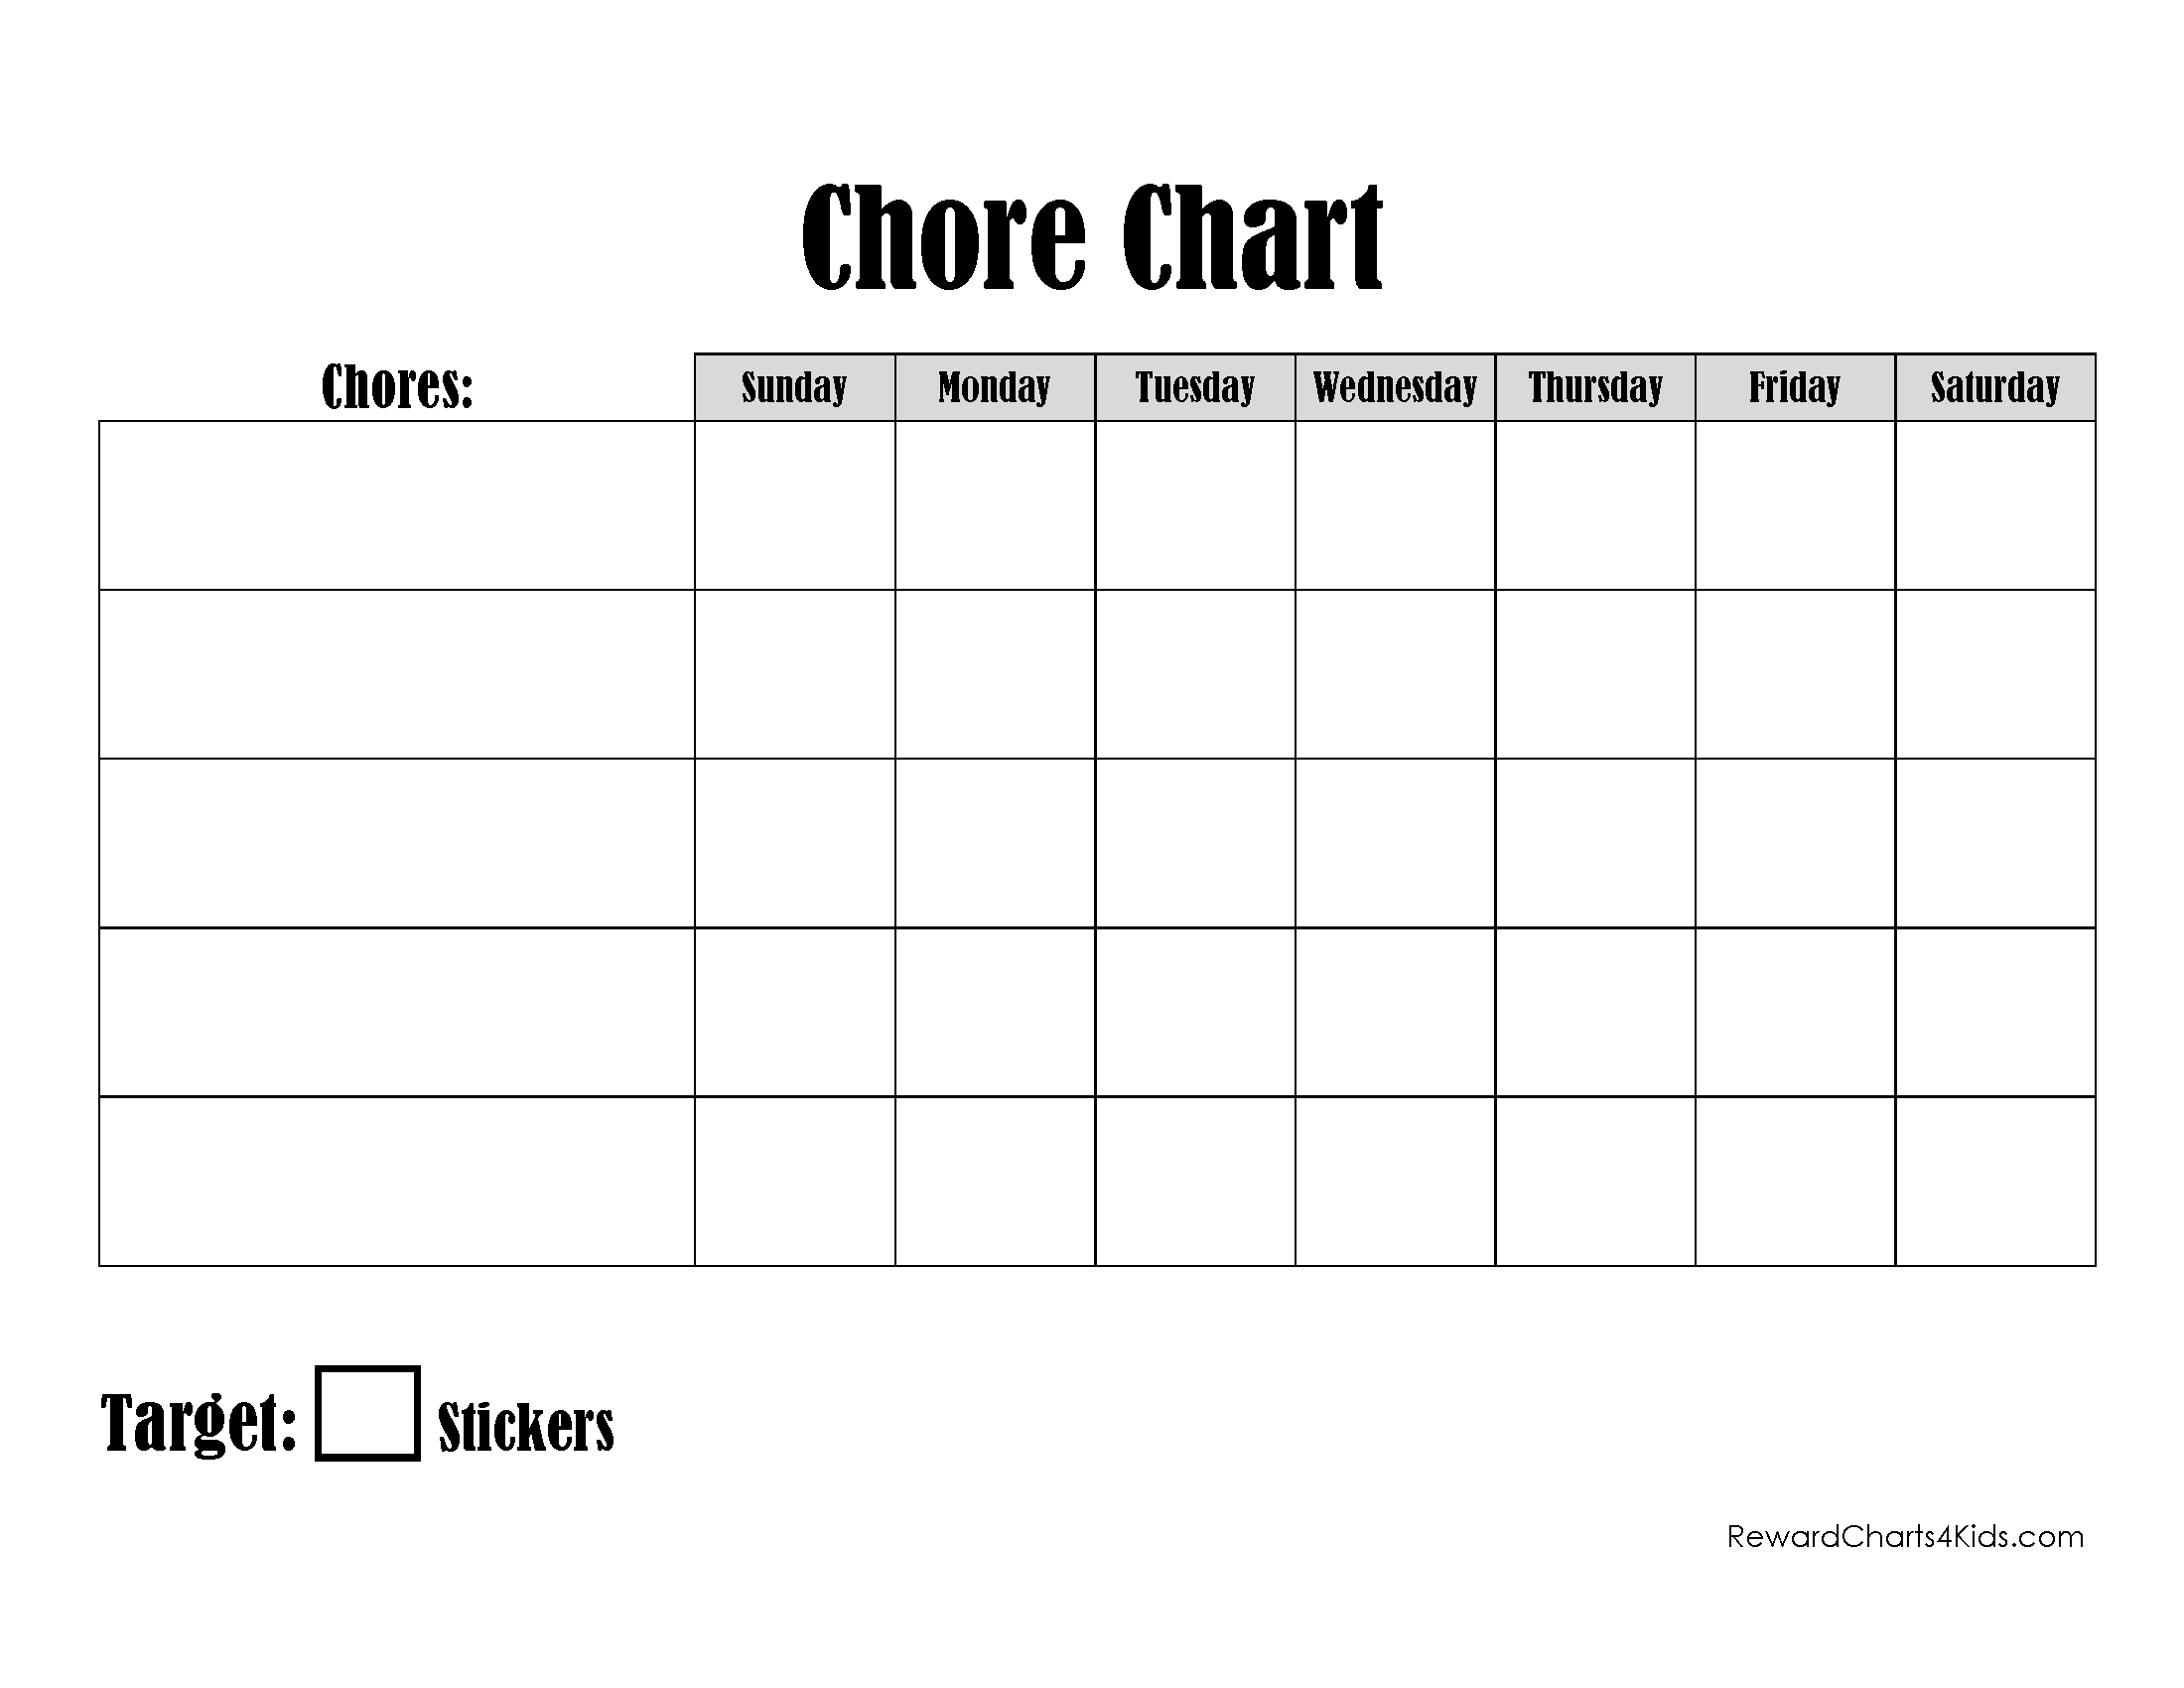 Free Printable Chore Chart for Kids Customize Online & Print at Home